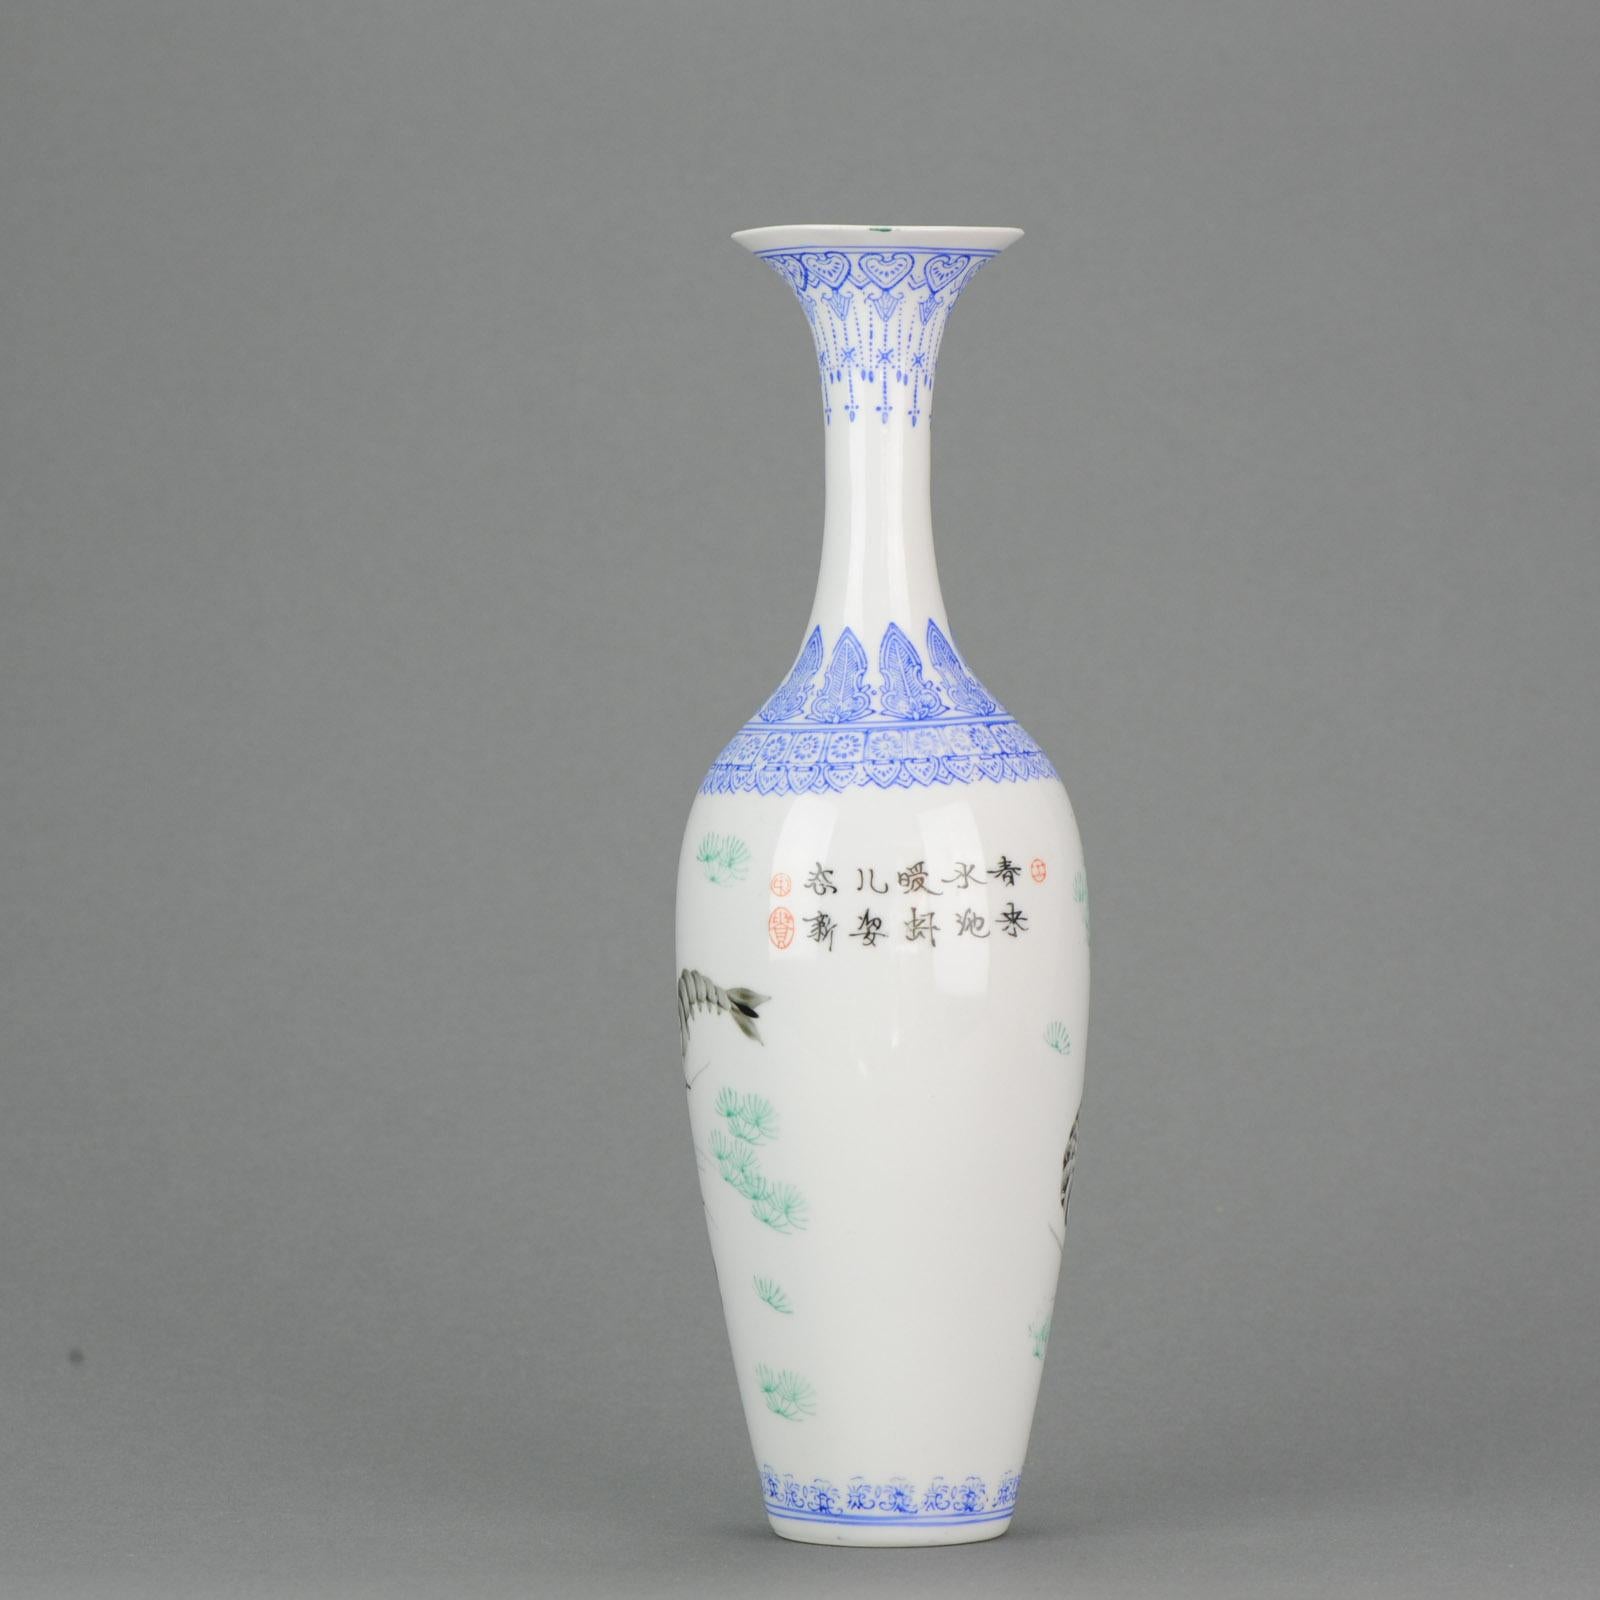 Very nice decorated eggshell vase 1970's-1980's. Lovely quality.

Provenance: Bought in Hong Kong in 1986.

Additional information:
Material: Porcelain & Pottery
Type: Vase
Region of Origin: China
Period: 20th century PRoC (1949 -